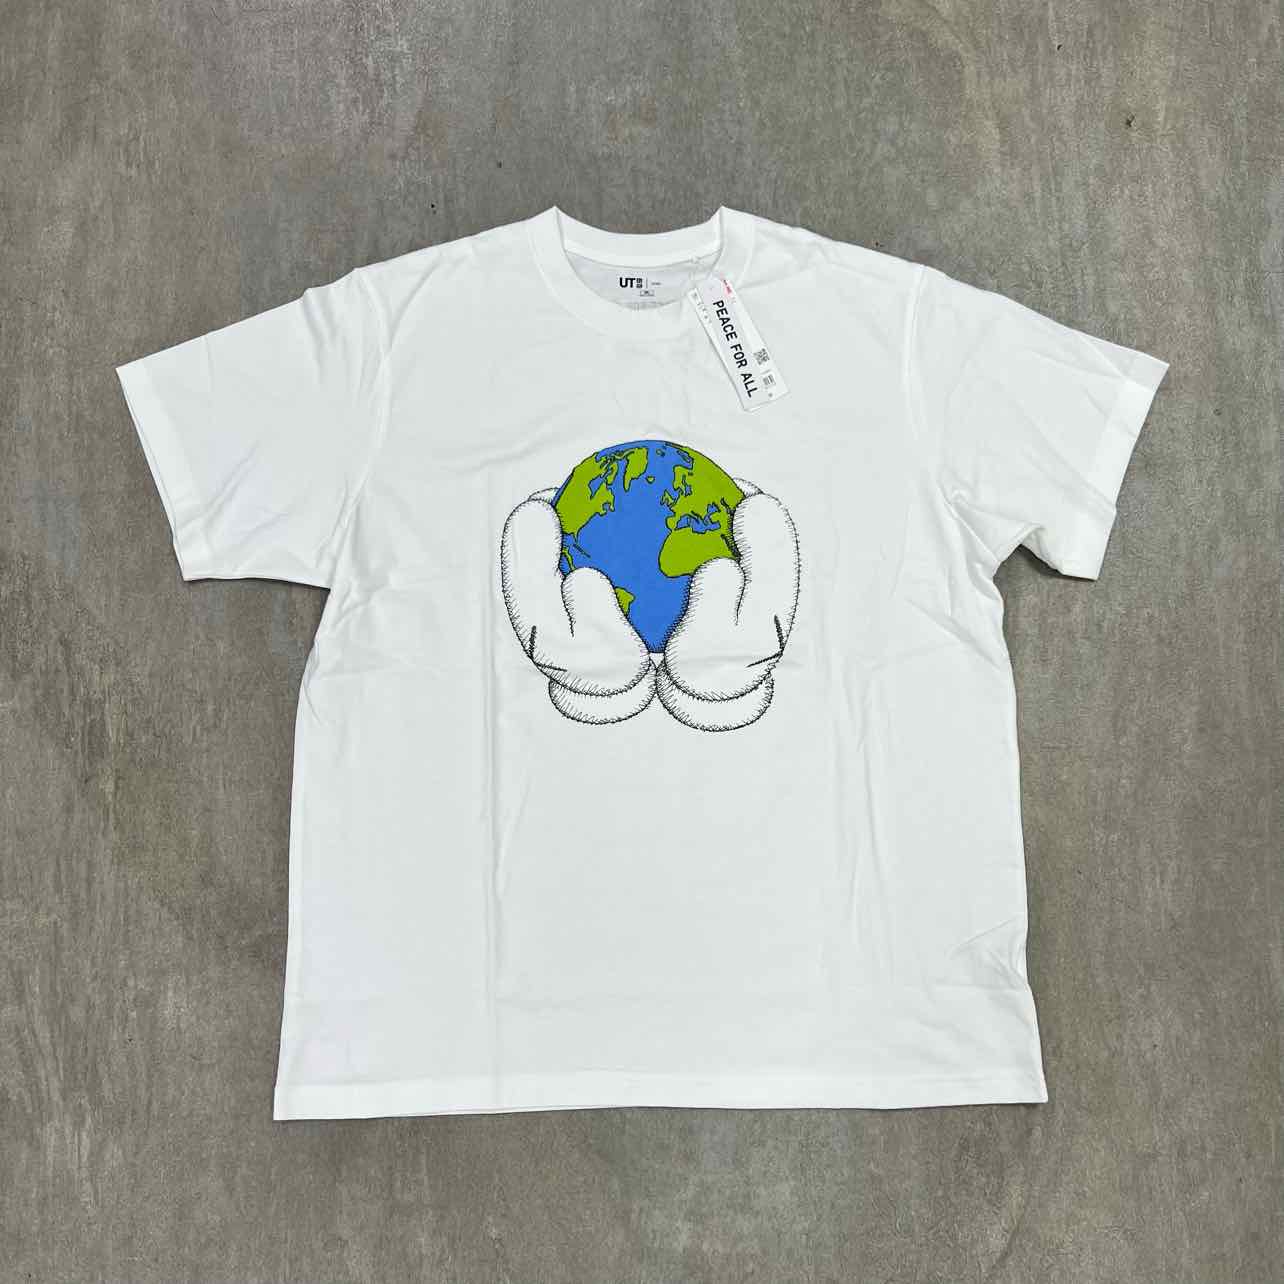 Uniqlo T-Shirt &quot;KAWS PEACE FOR ALL&quot; White New Size XL